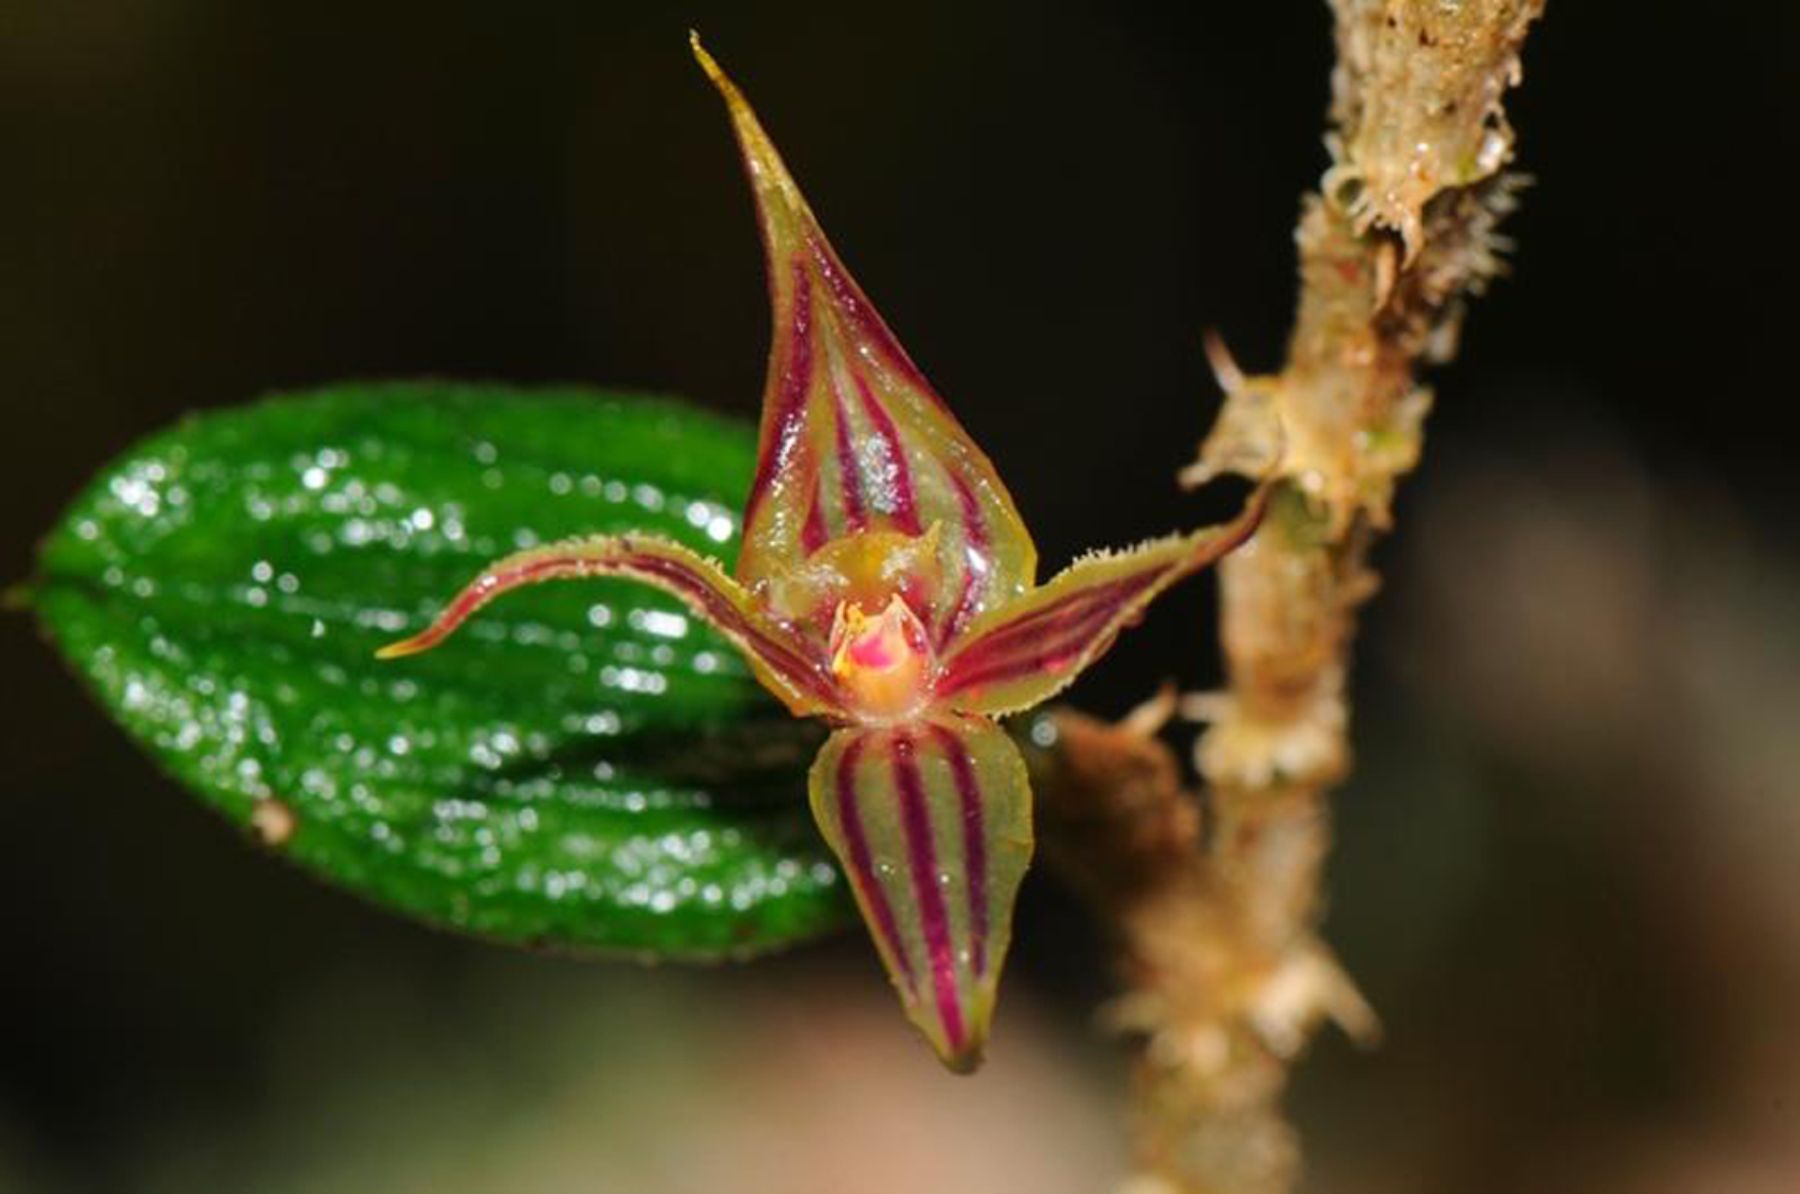 The Brachionidium Inkaterrense, one of the two recently discovered orchids in the Inca citadel of Machu Picchu.